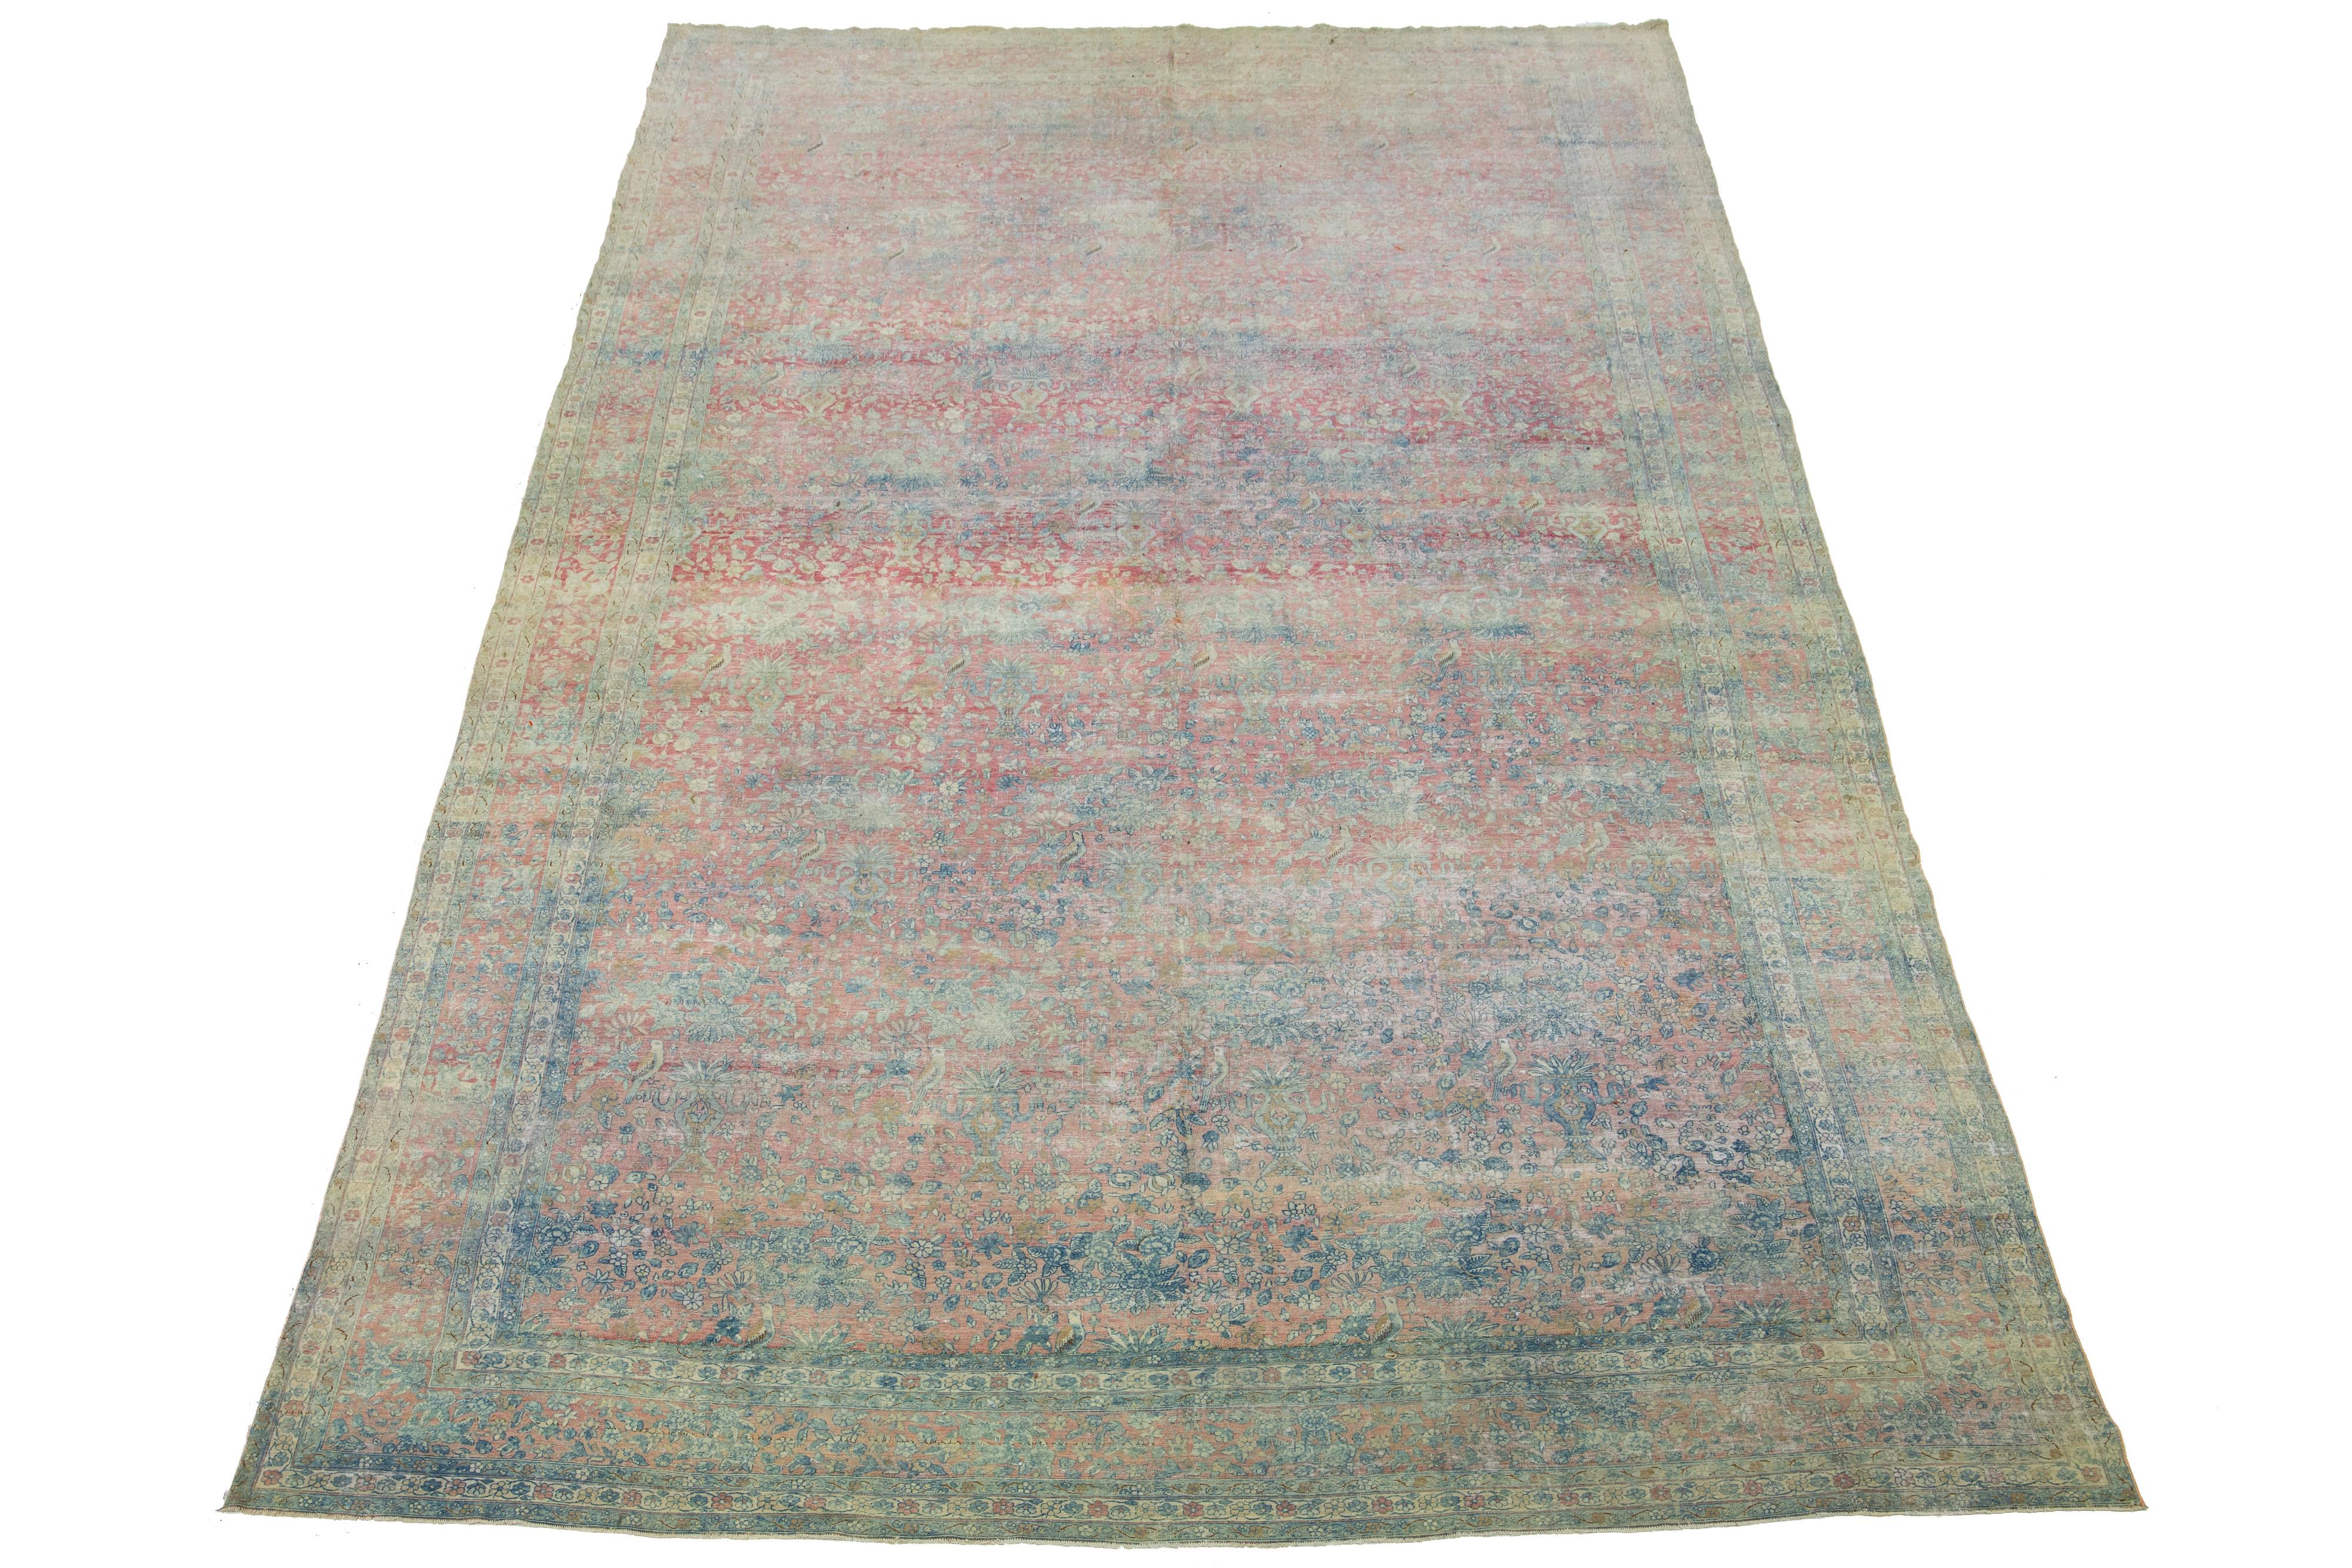 This Persian Kerman wool rug, dating back to the early 1900s, showcases a meticulously crafted allover floral design in blue. This exquisite antique rug carries a rich historical value and is ideal for those seeking elegance and sophistication in